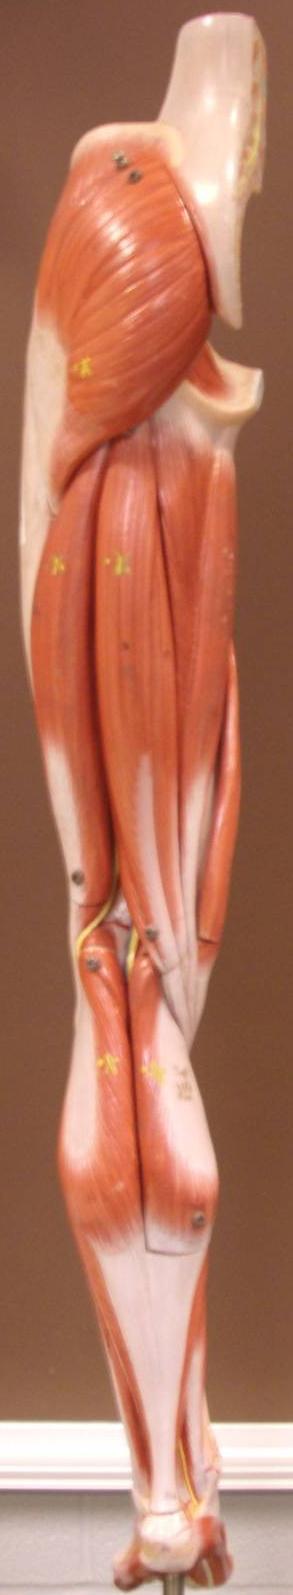 Leg Muscles (Posterior View) Model 3-8 Gluteus Maximus Adductor Magnus Biceps